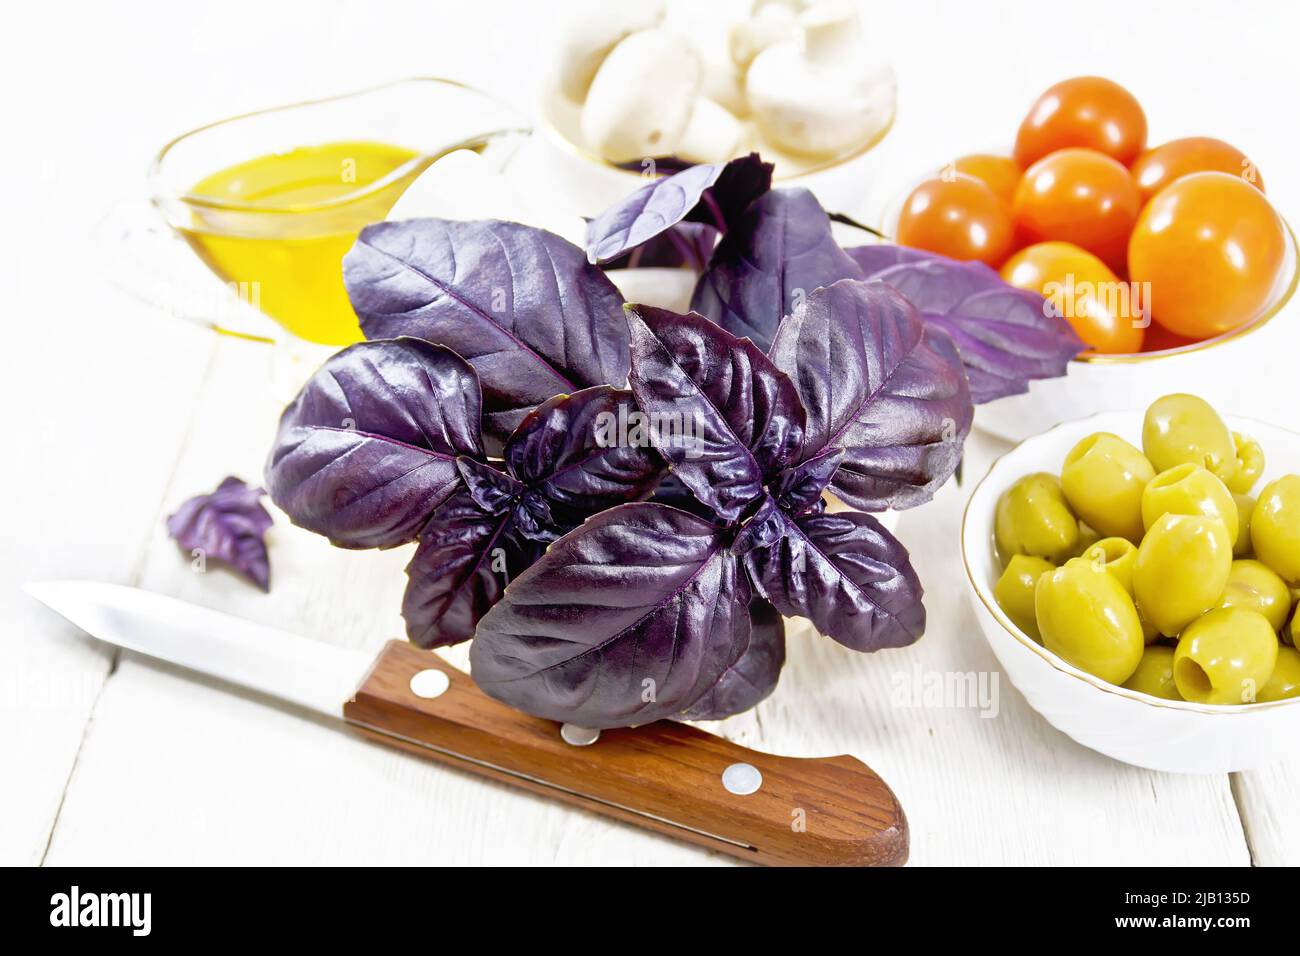 Fresh purple basil in a mortar, olives, tomatoes and champignons in bowls, vegetable oil in gravy boat and a knife on white wooden board background Stock Photo